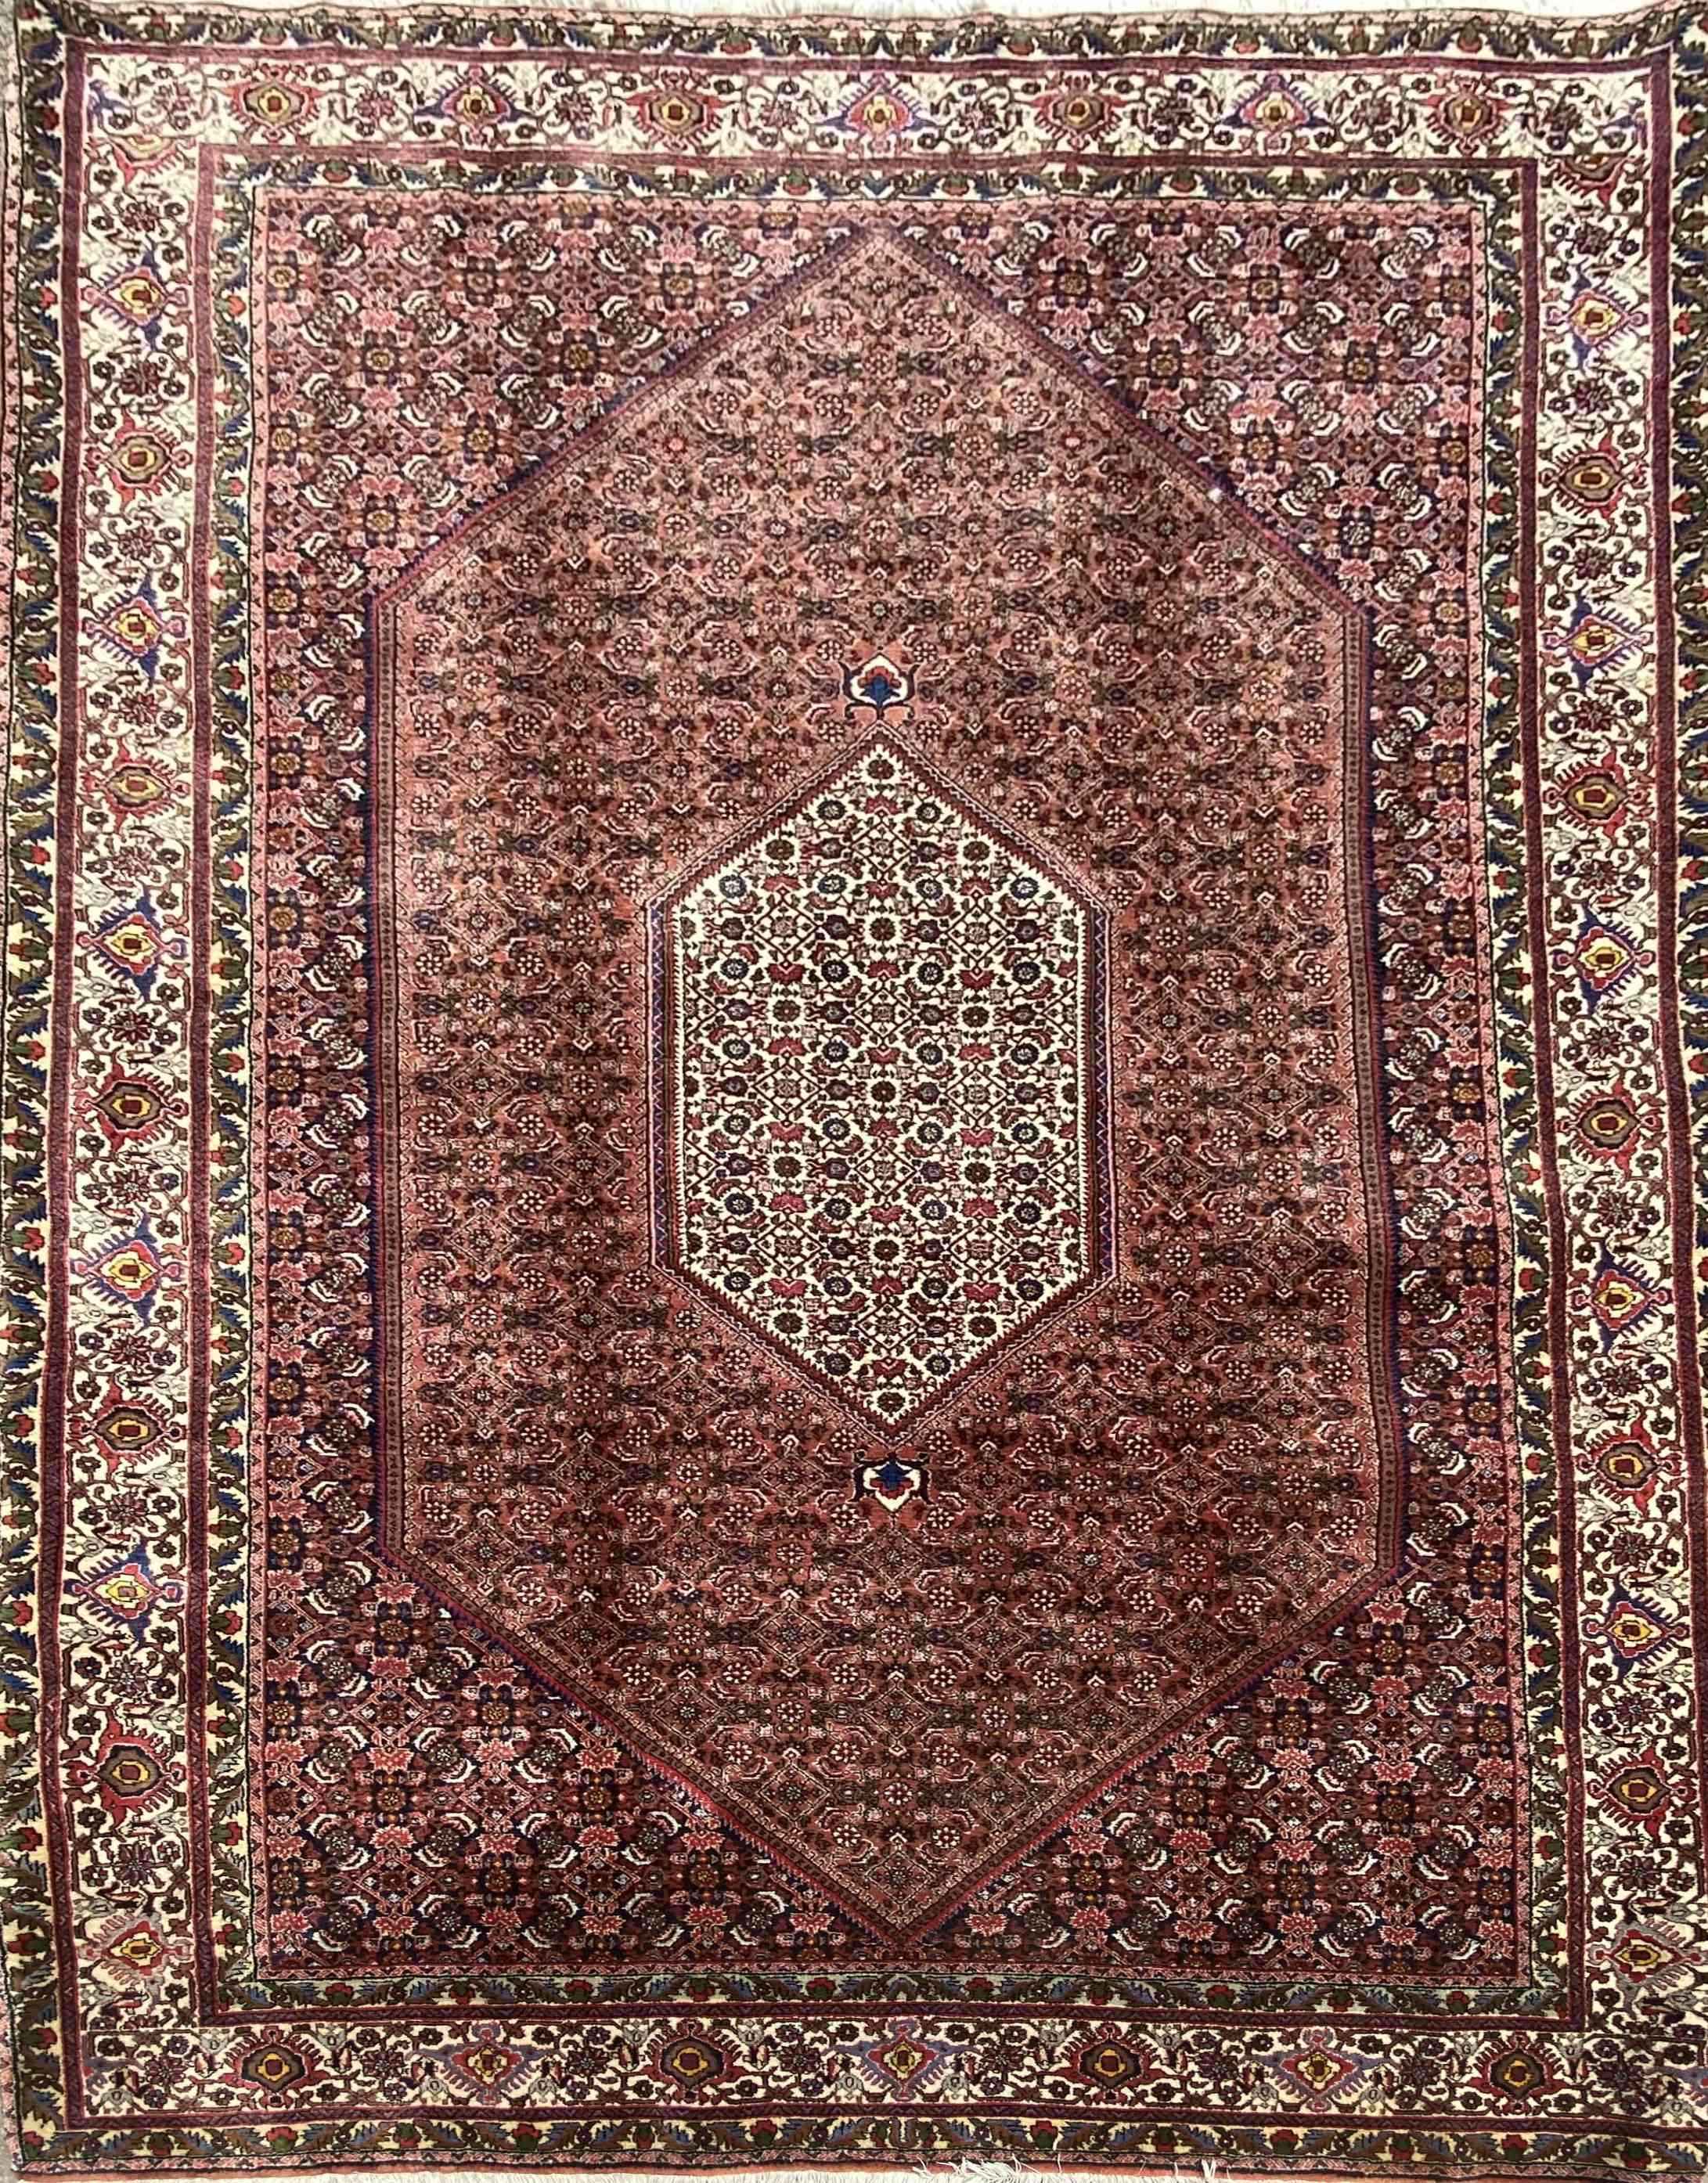 3' 4 x 3' 4 Red and White Bijar Floral Persian Rug (WOOL)